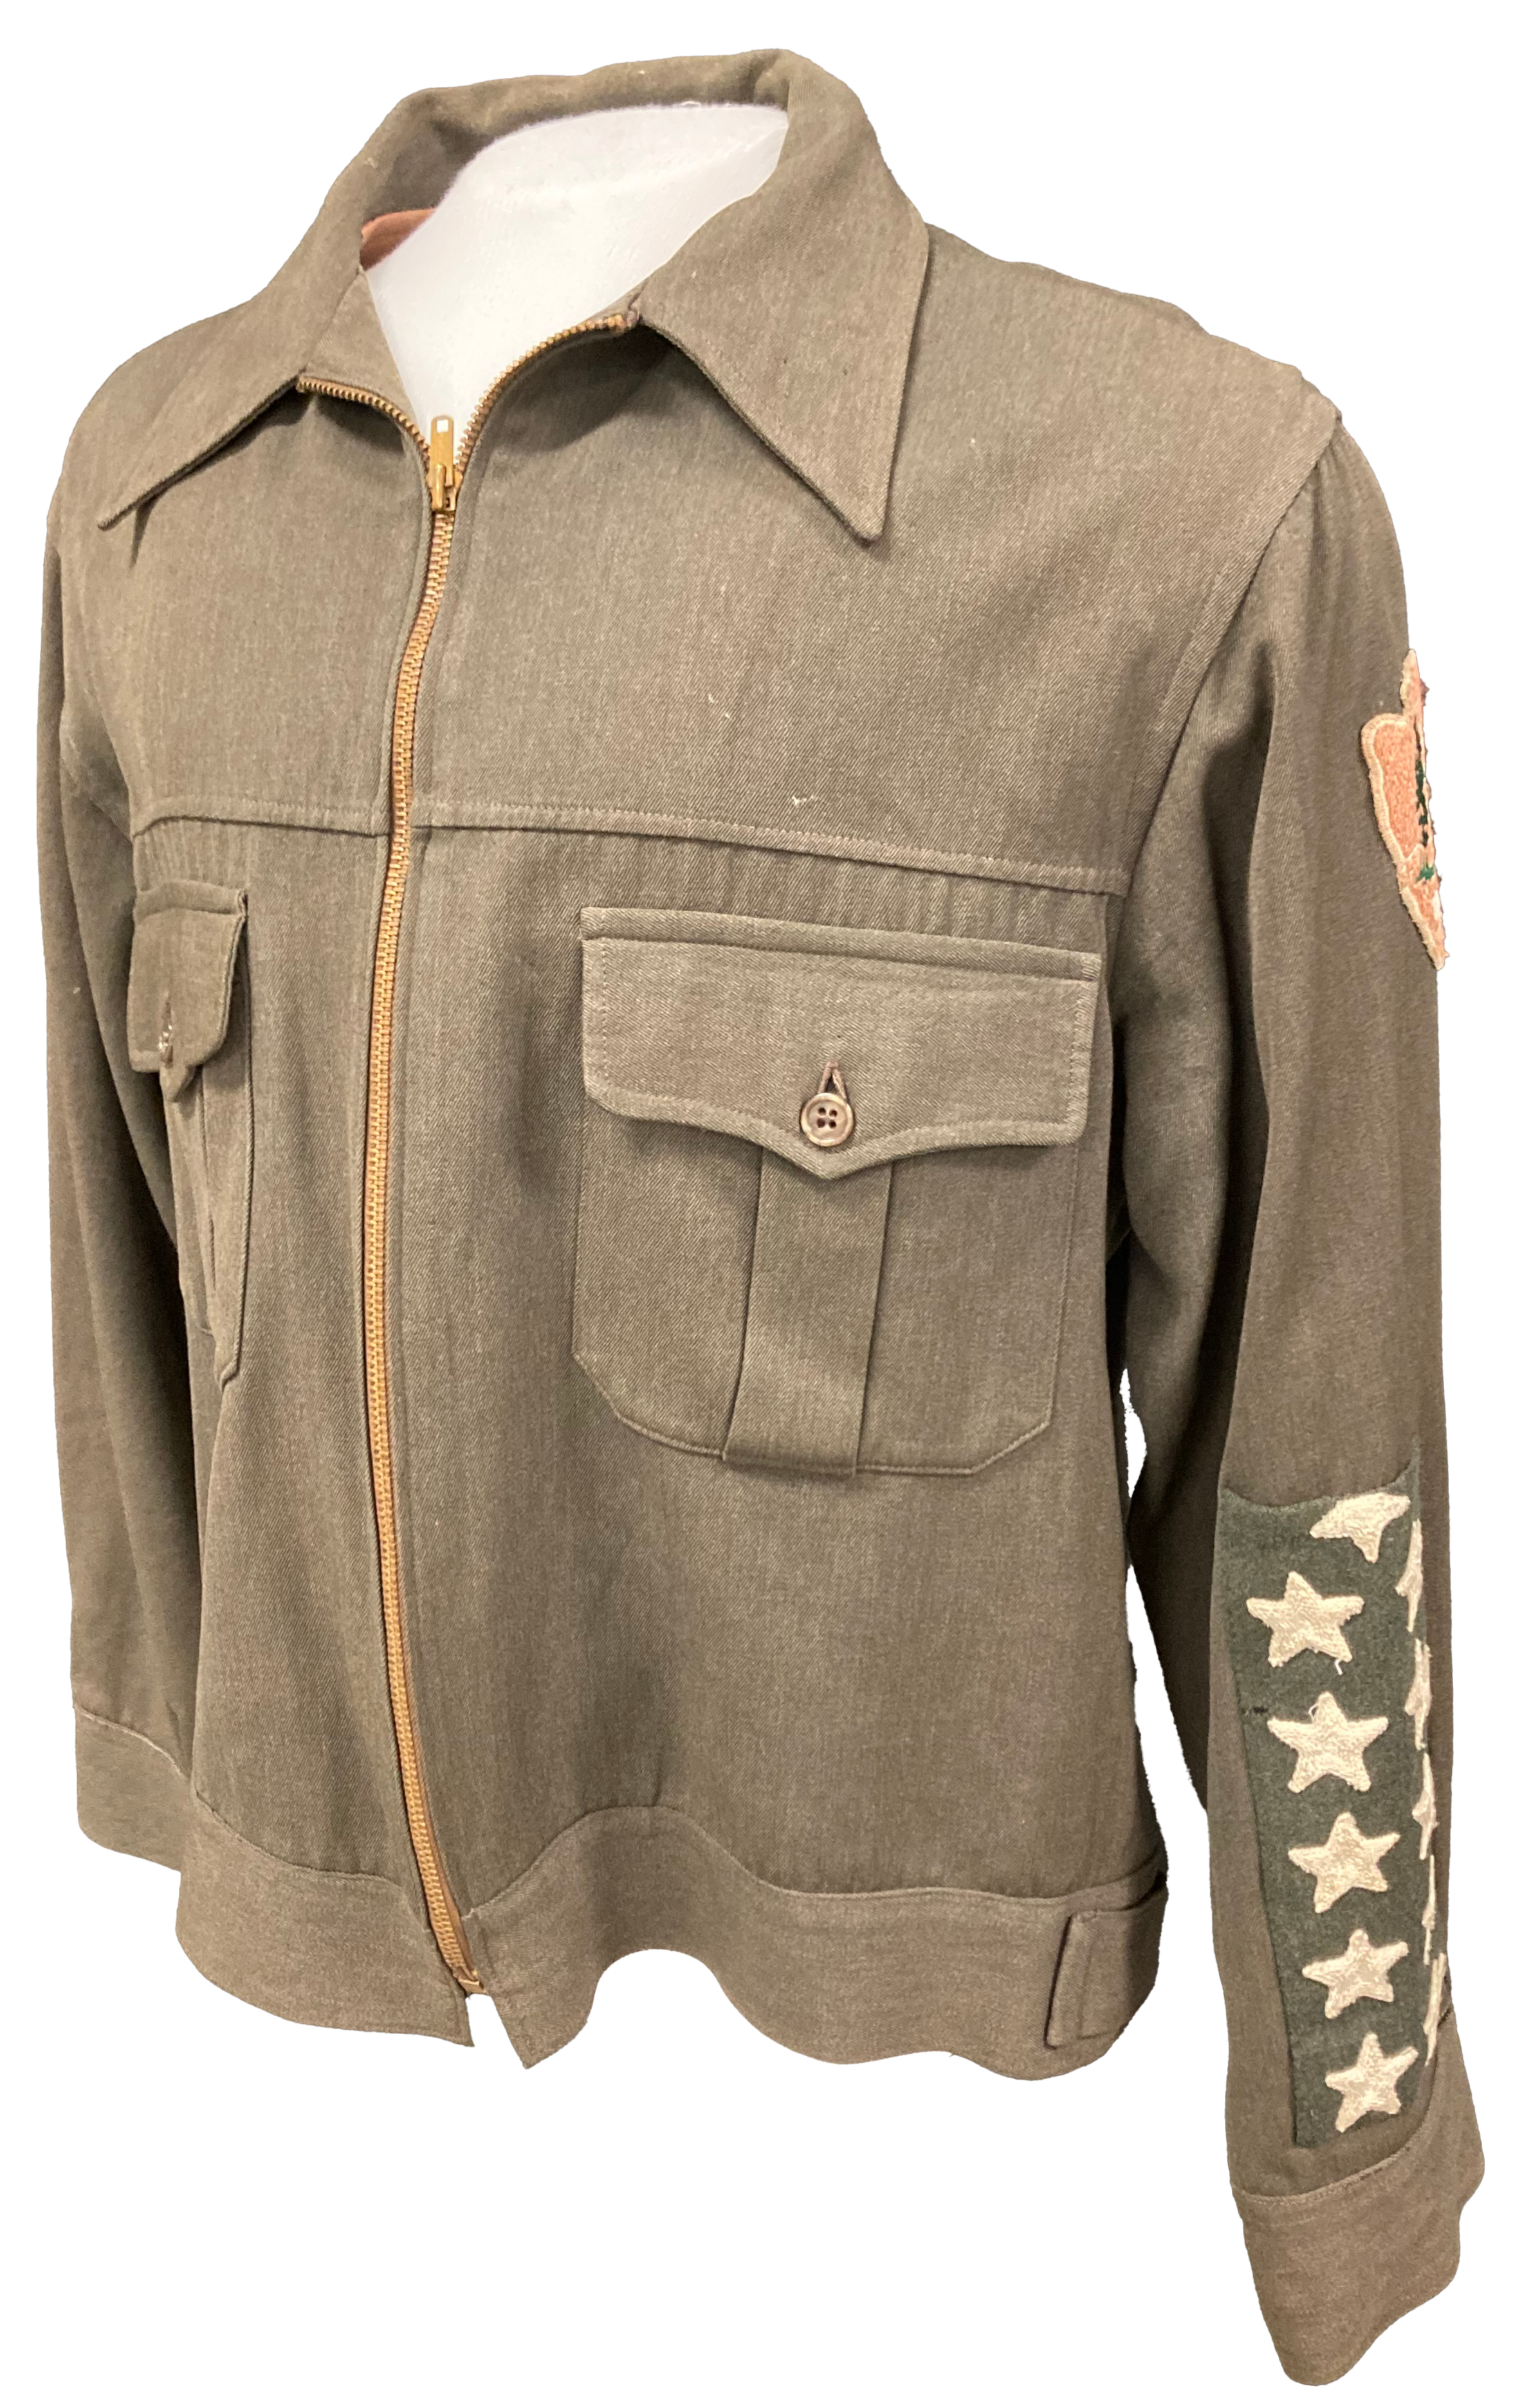 Green jacket with oversized stars on sleeve and arrowhead patch